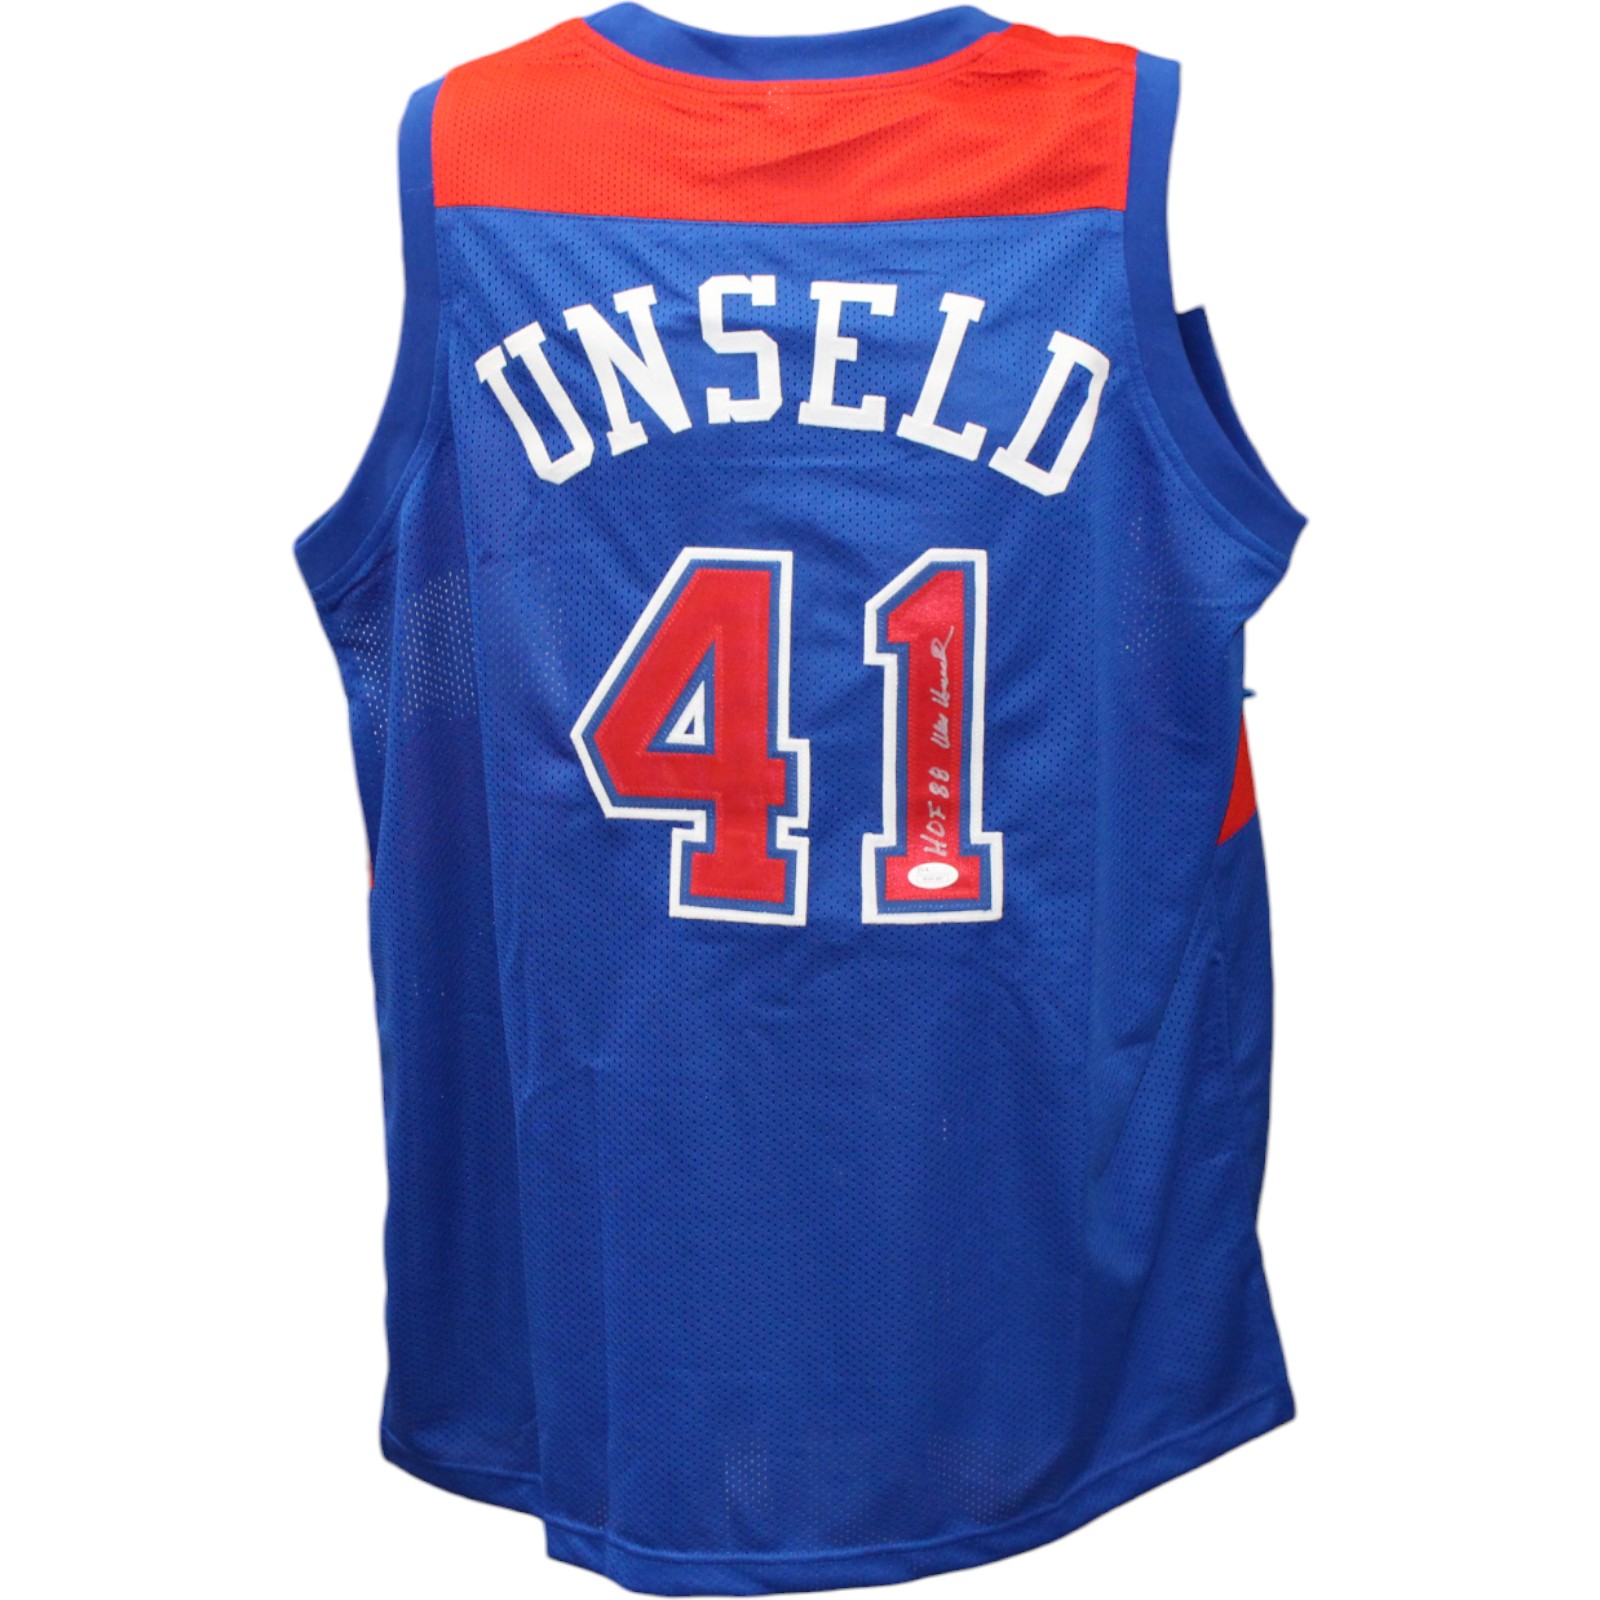 Wes Unsled Autographed/Signed Pro Style Red Jersey JSA